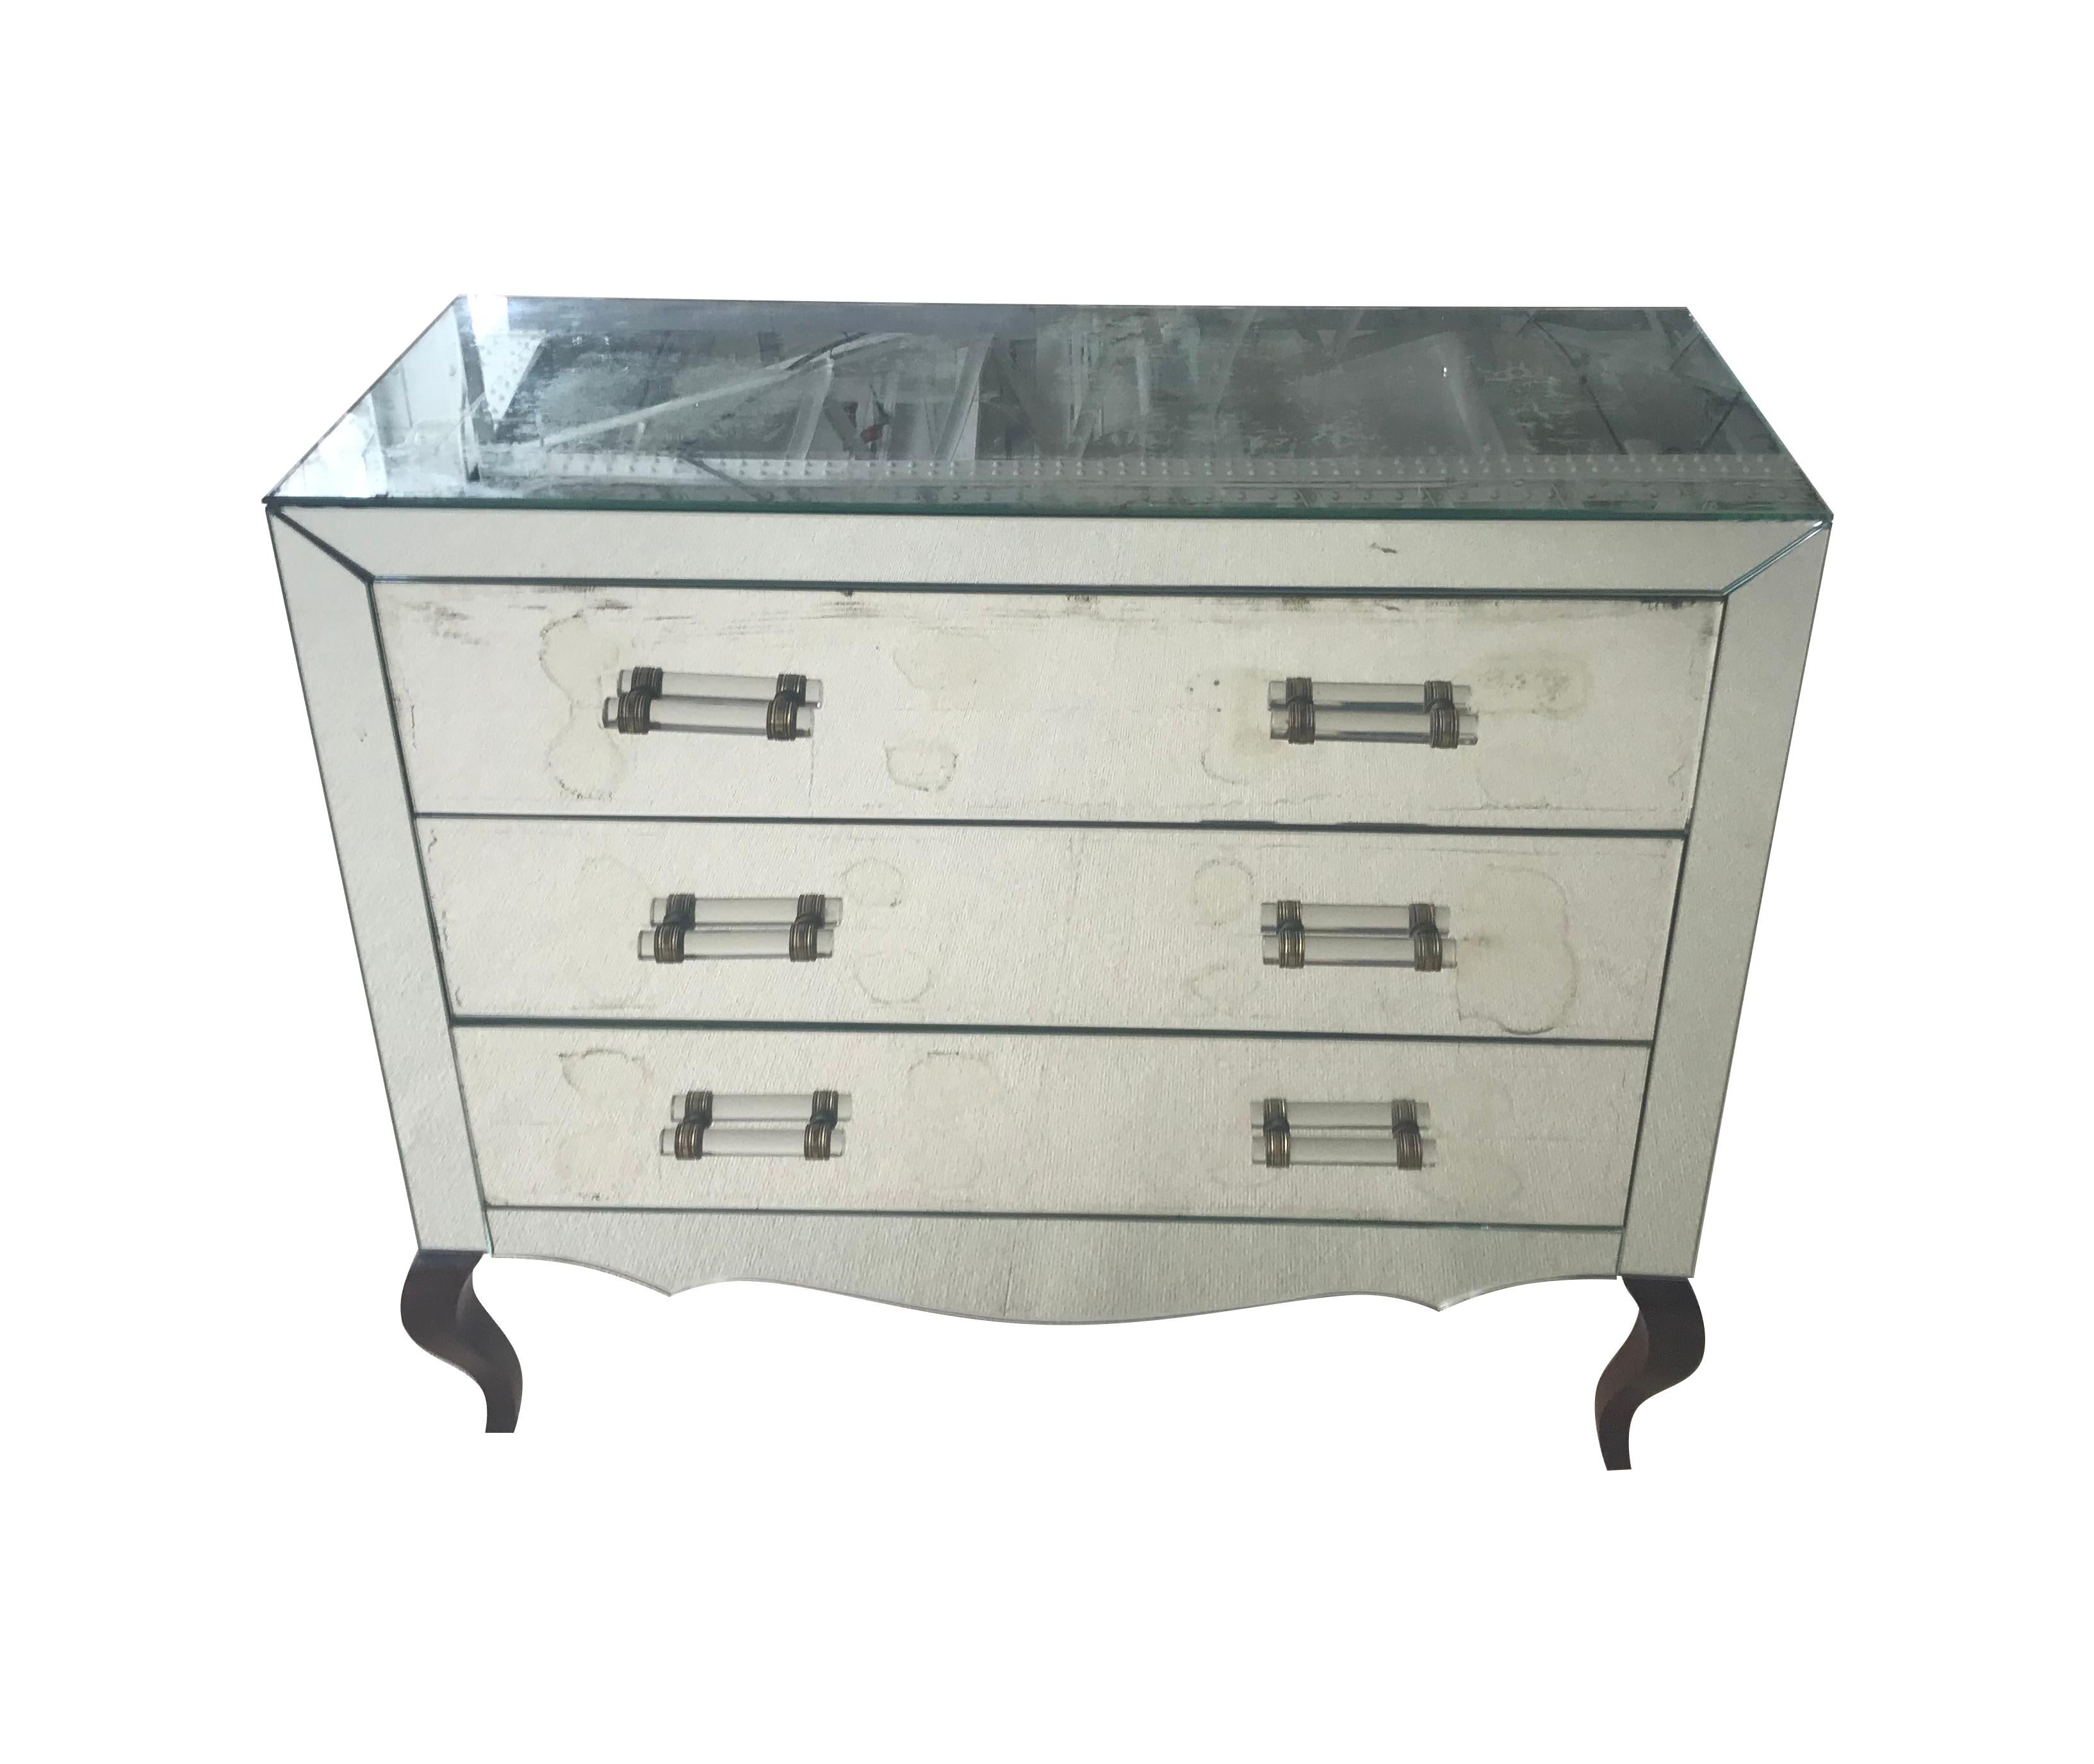 An Art Deco mirrored chest of drawers with three drawers each with two glass handles with brass detailing on. The interiors of the drawers are pine with ebonized saber feet. There is some original foxing on the mirror top and front, but part of the